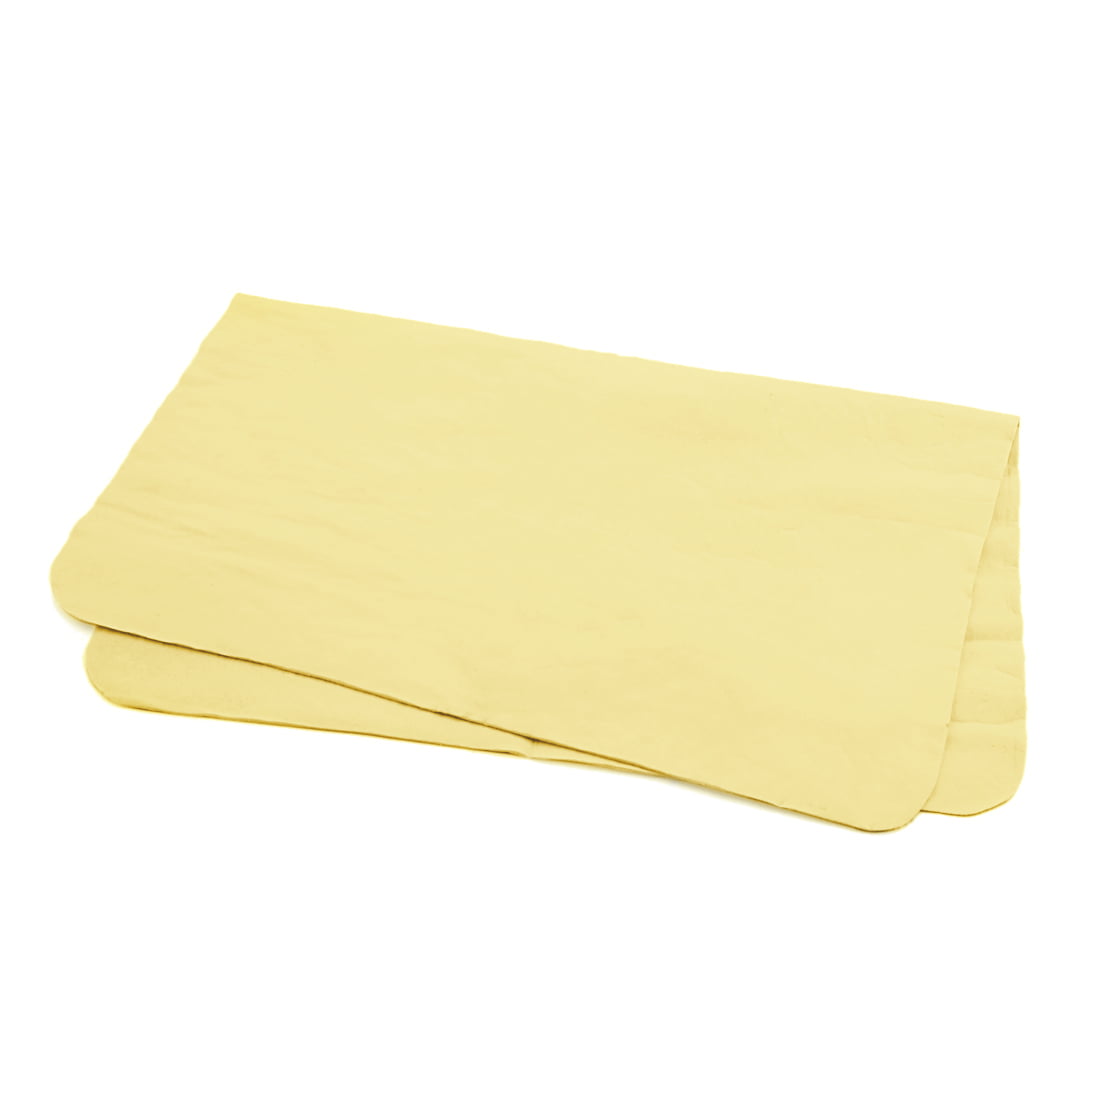 Chamois Cloth for Car -Pack of 3 24 x 16 inches Chamois Cleaning Cloth Drying Towel Car Syntheti Towel Super Absorbent,